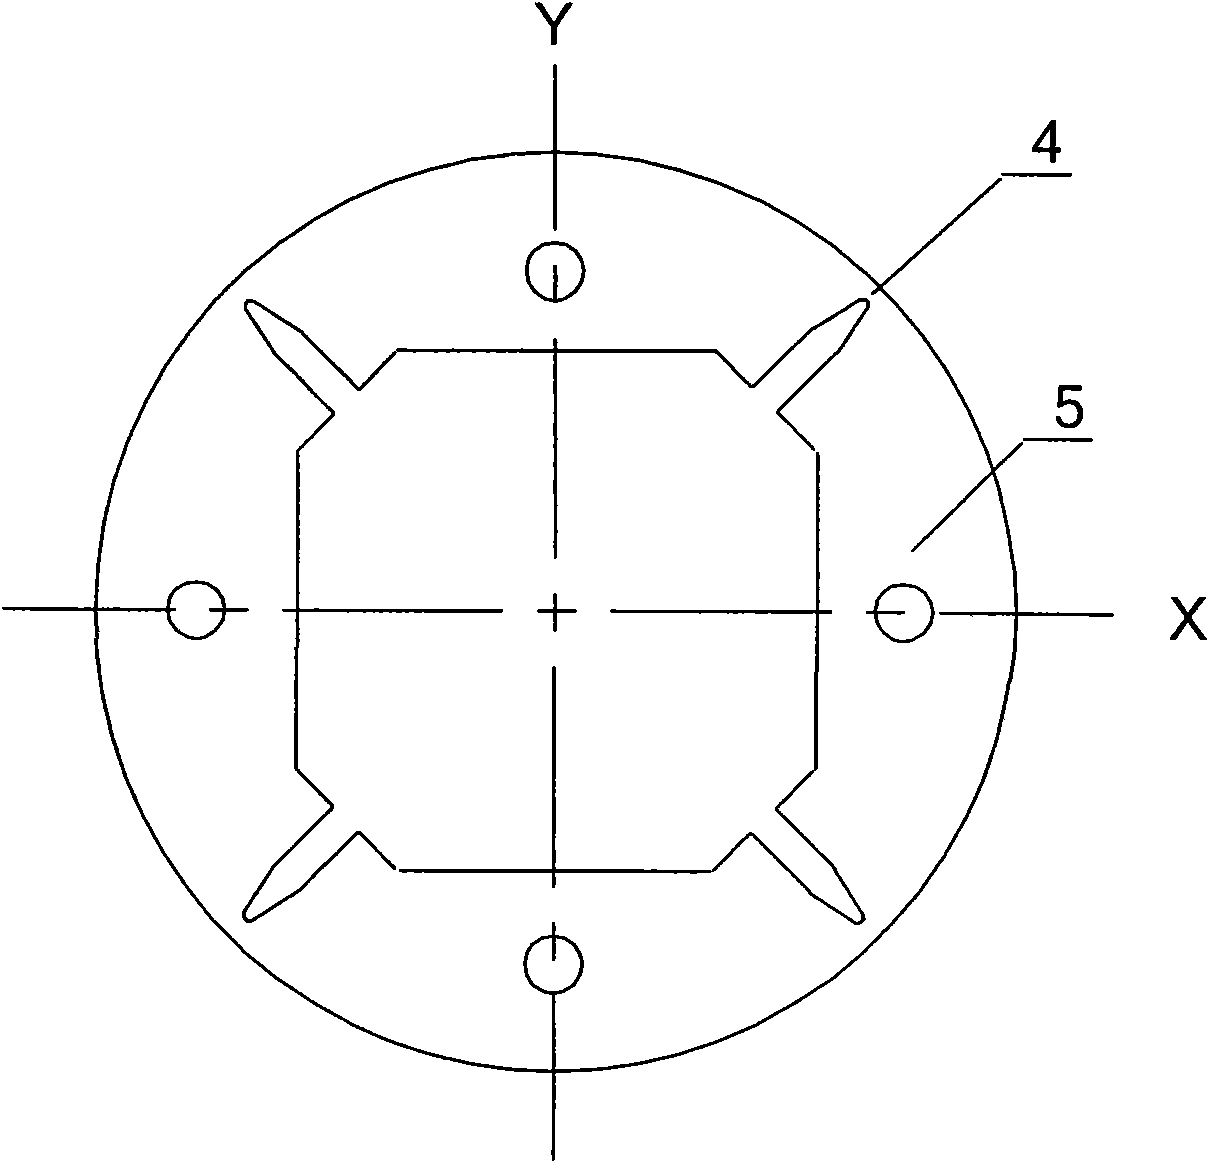 Mixed magnetic bearing with horizontal-coil uniform radial pole and low-loss outer rotor